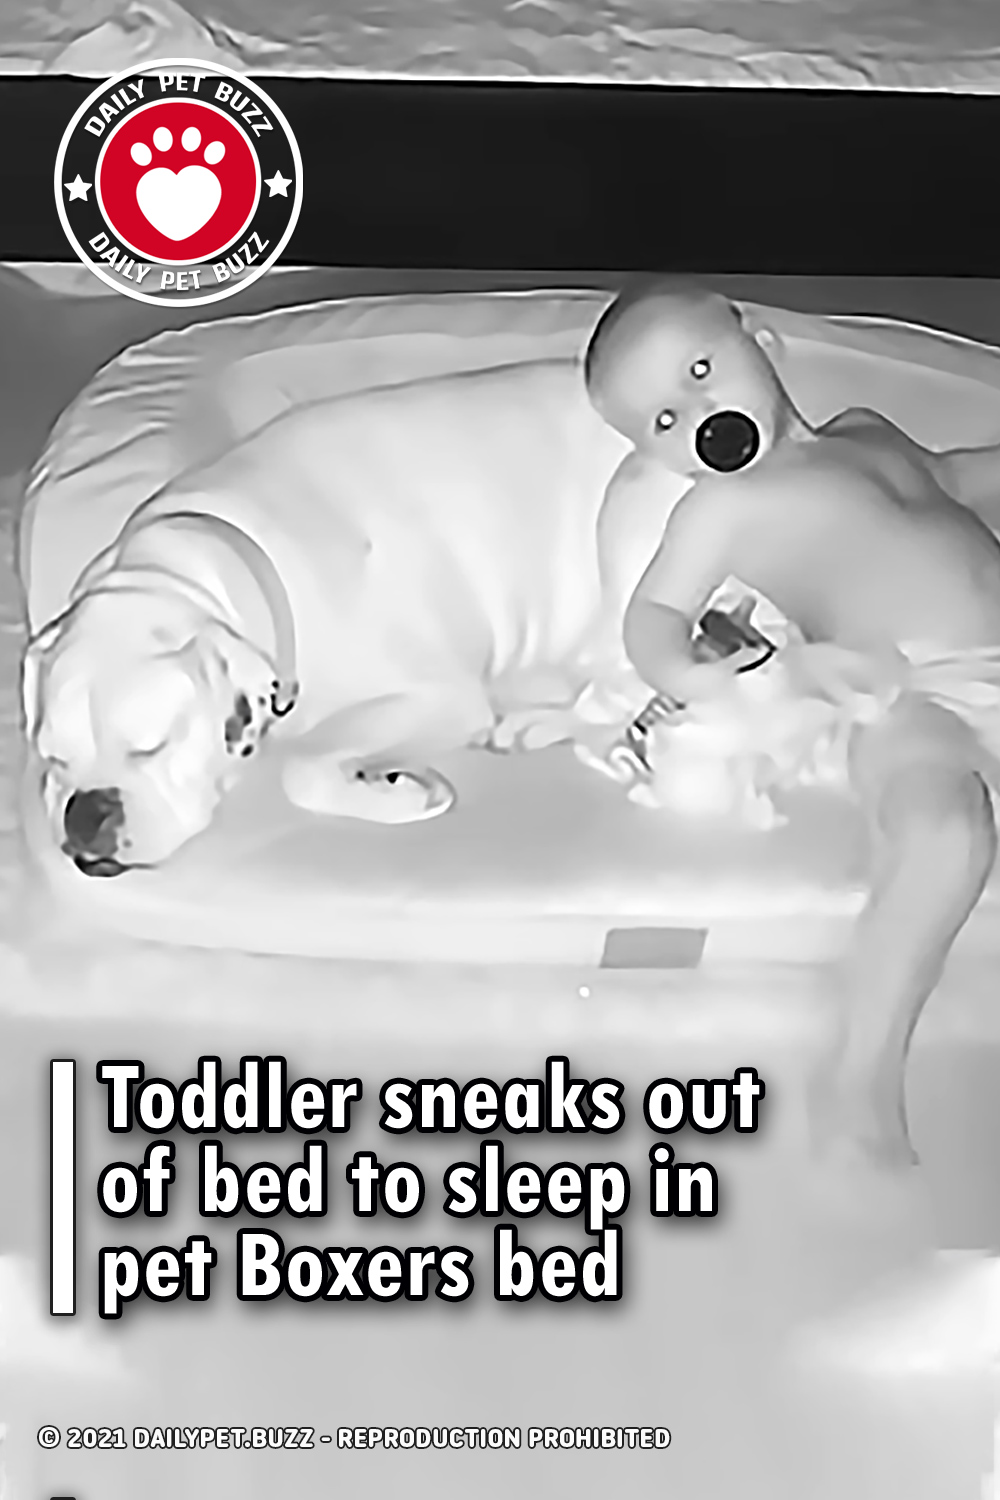 Toddler sneaks out of bed to sleep in pet Boxers bed